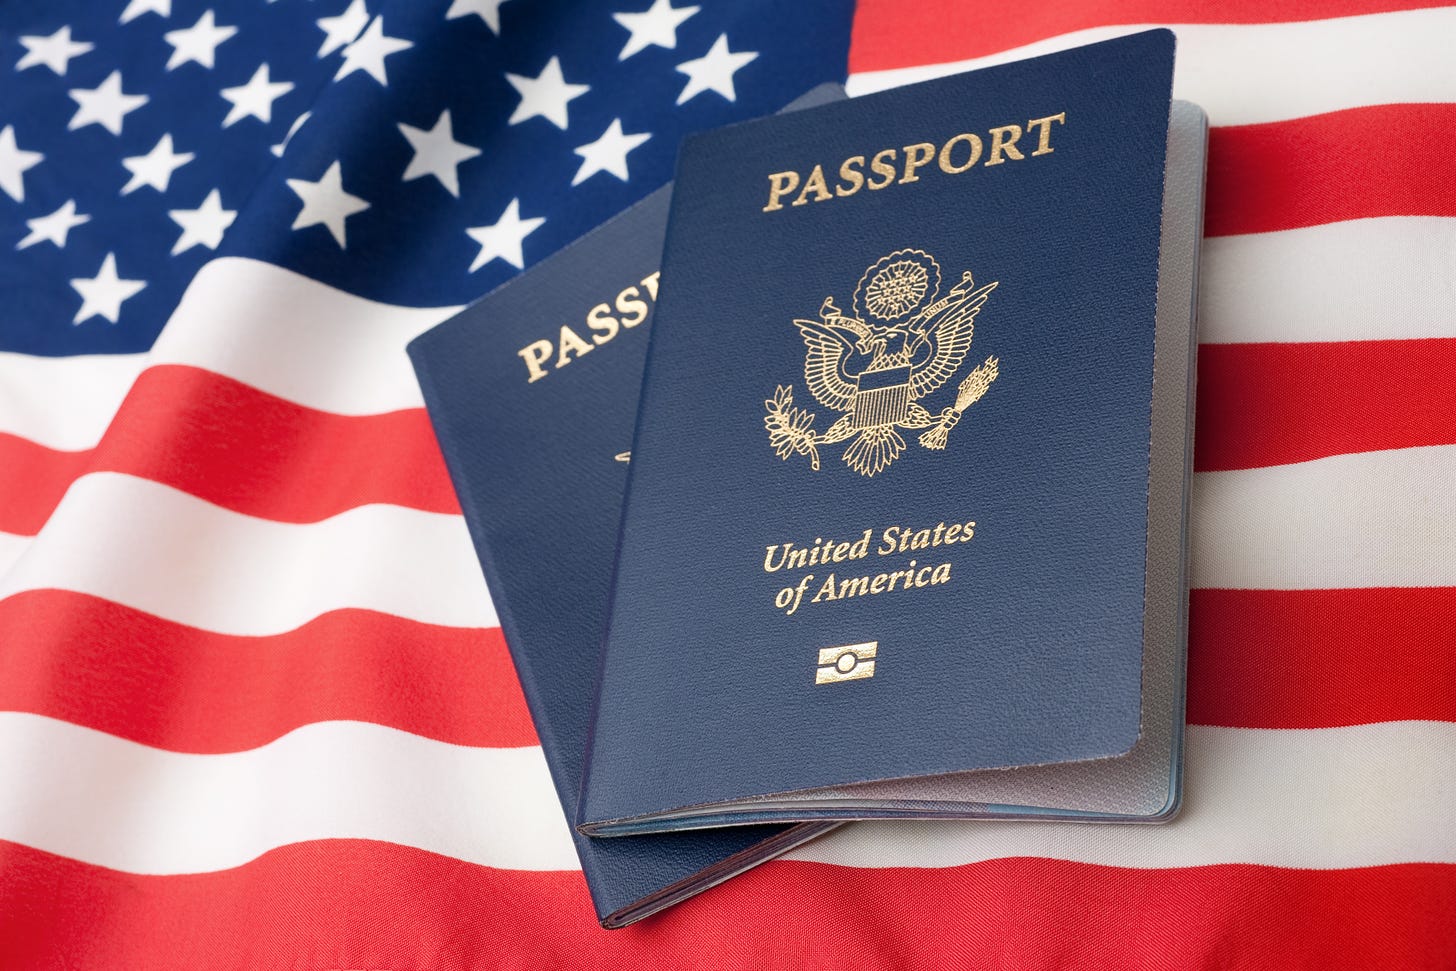 Did your passport expire during lockdown? It may take a while to replace it